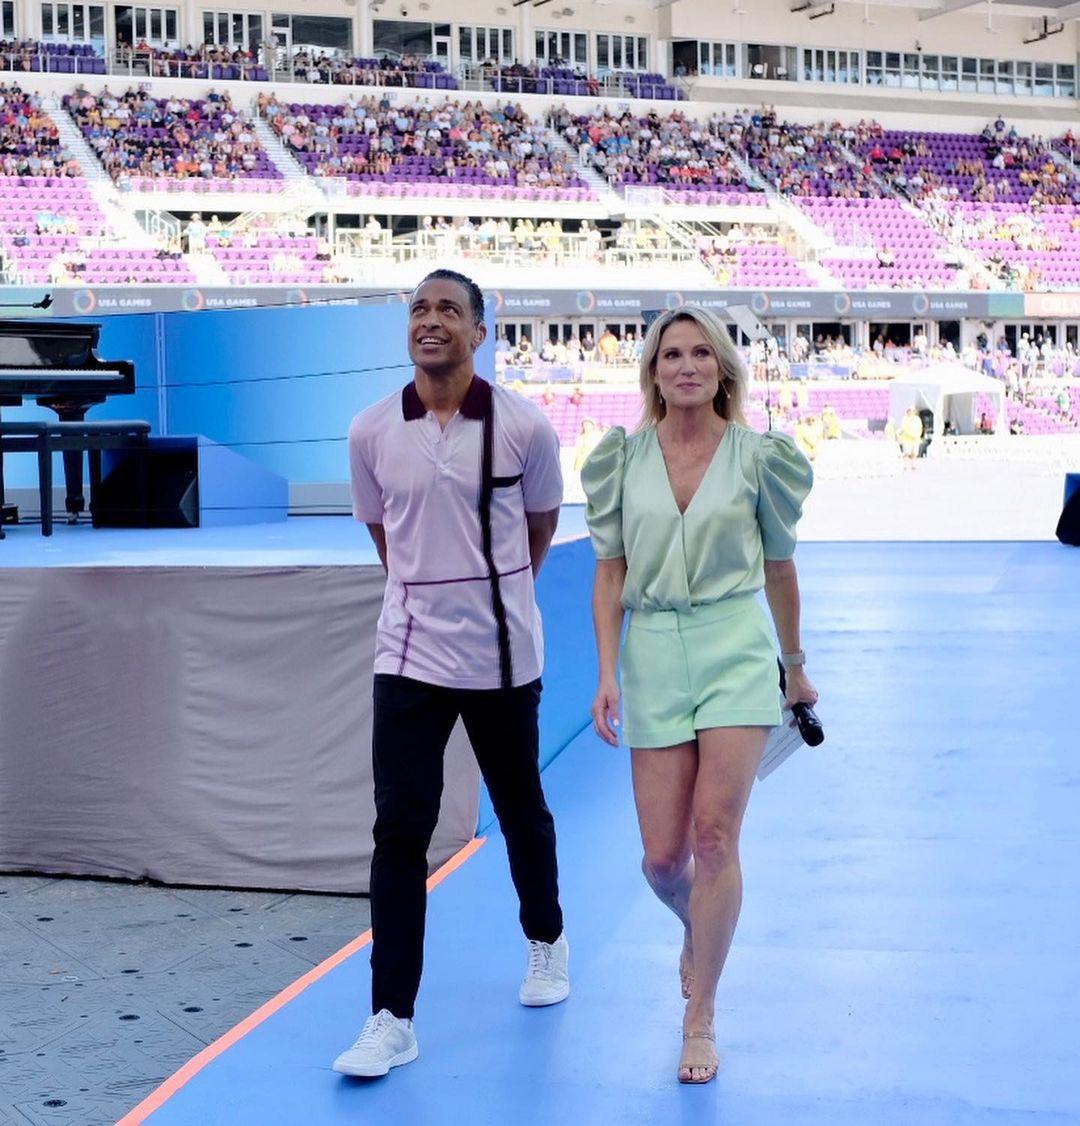 T.J. Holmes & Amy Robach walking together